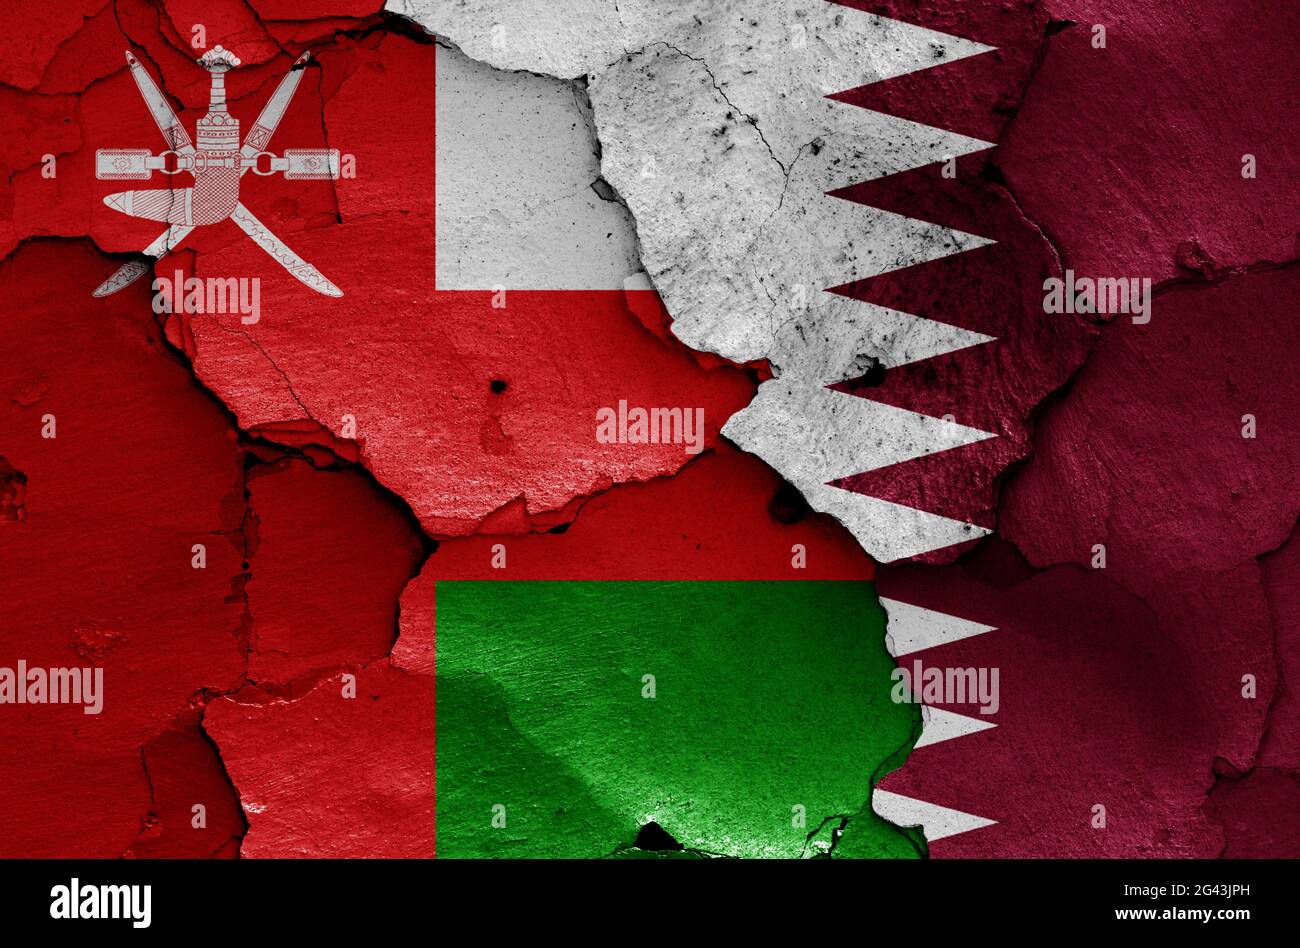 Flags of Oman and Qatar painted on cracked wall Stock Photo